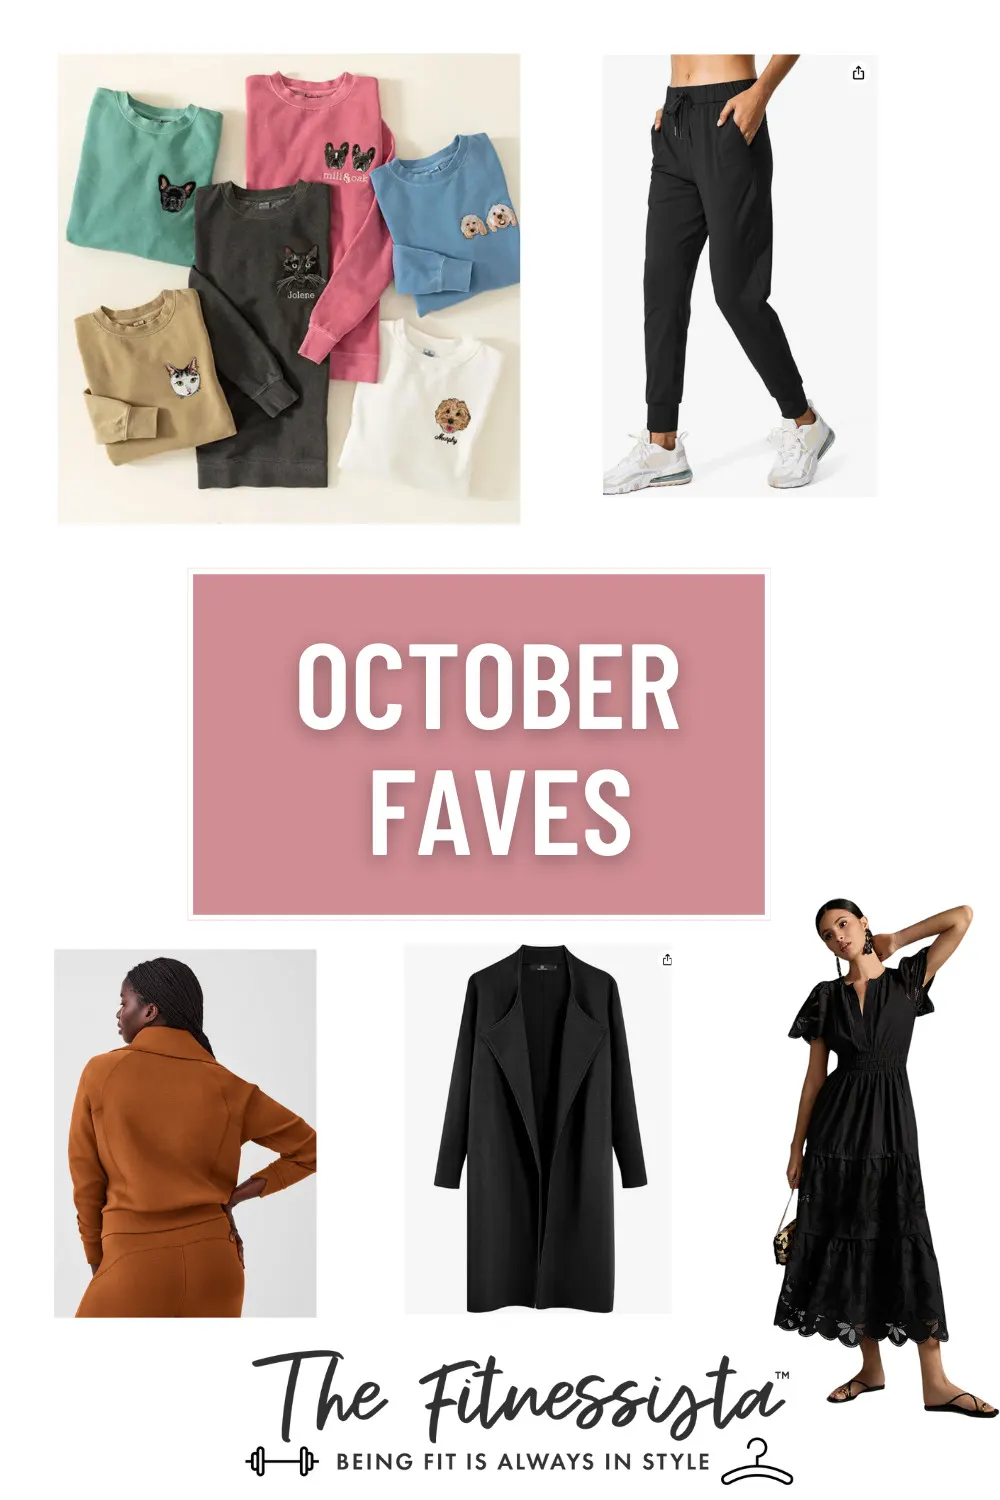 October faves